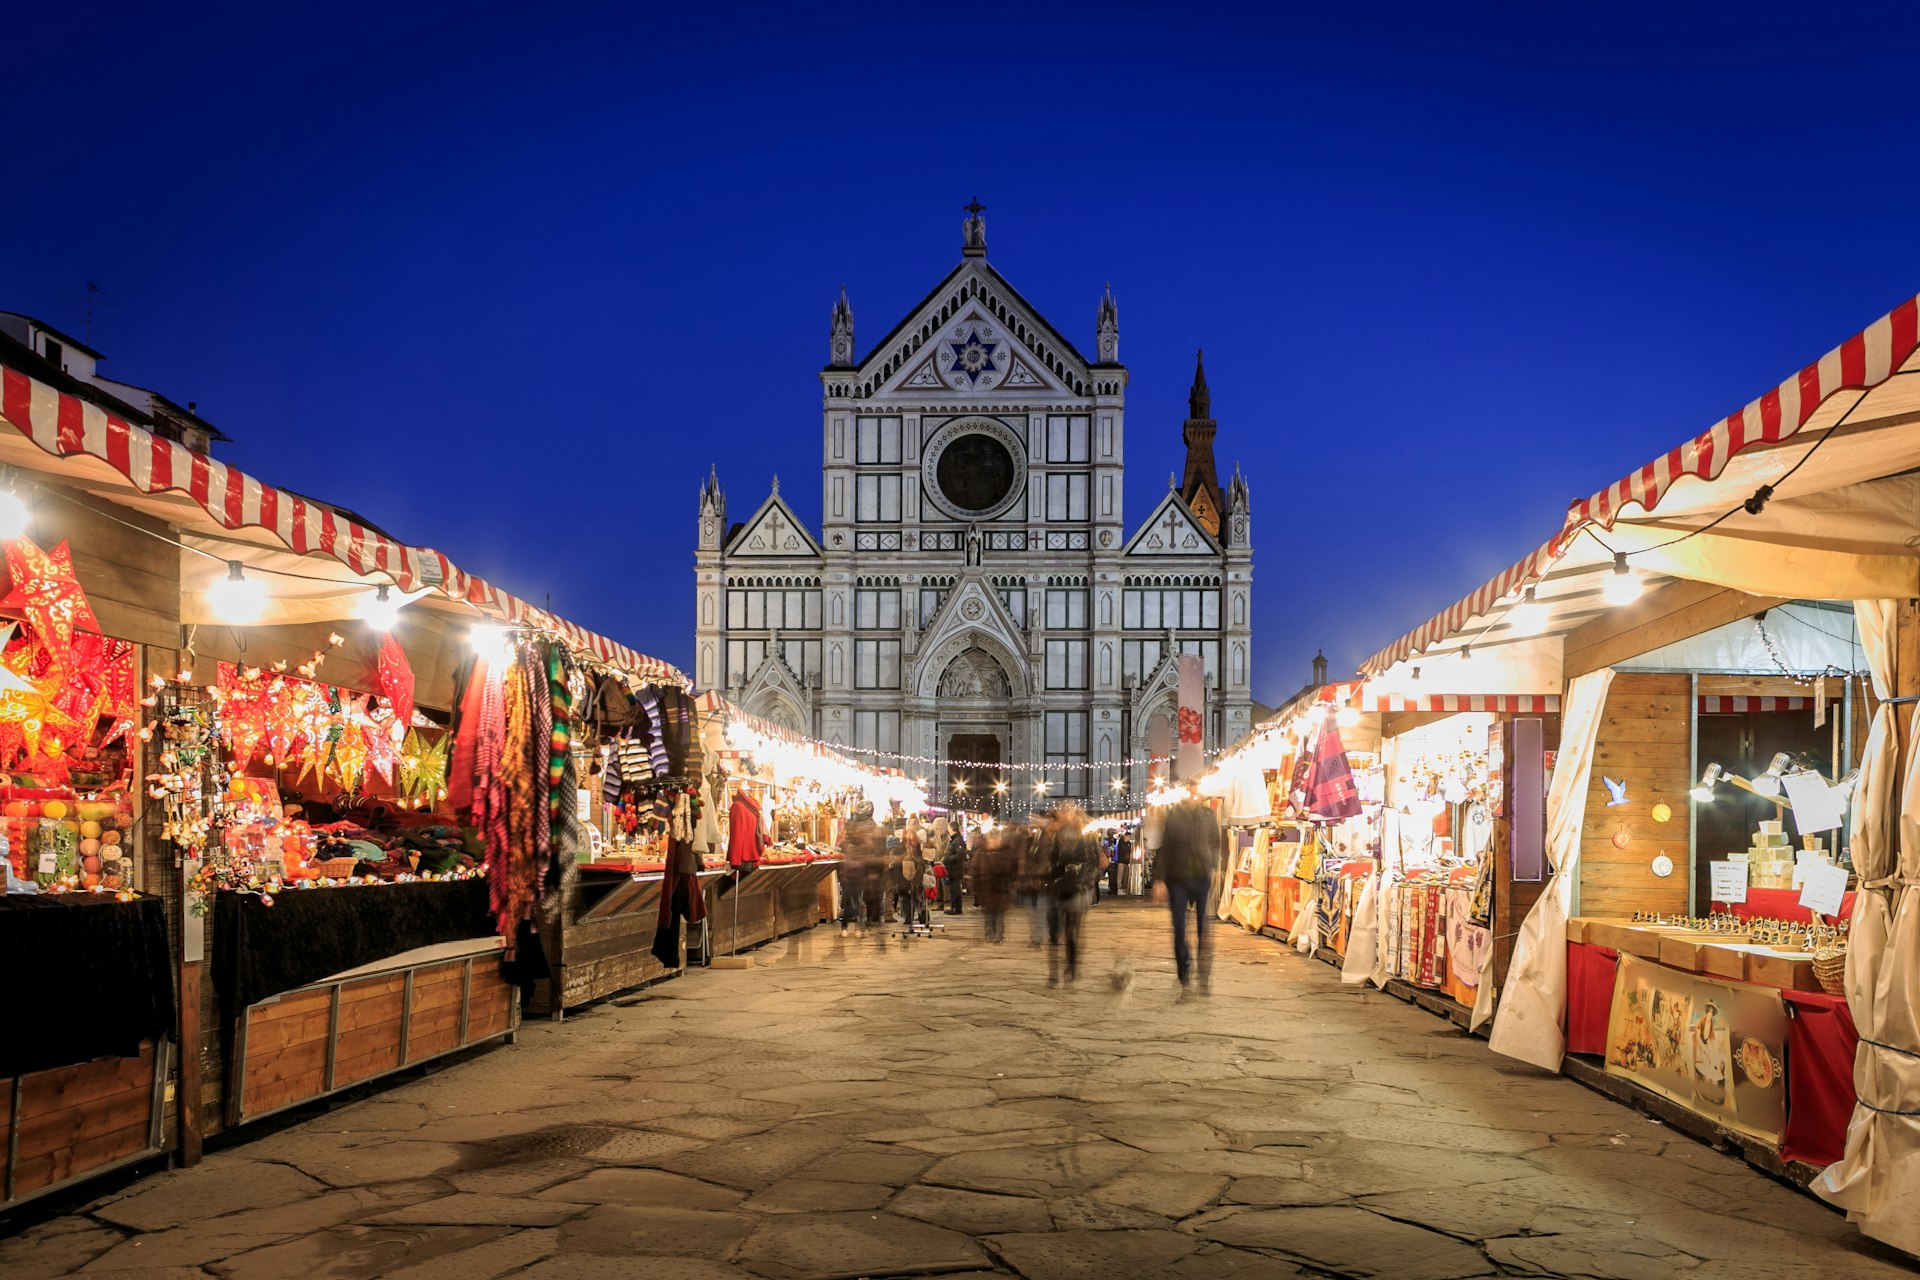 People shop at a row of winter market stalls lit up in front of a church